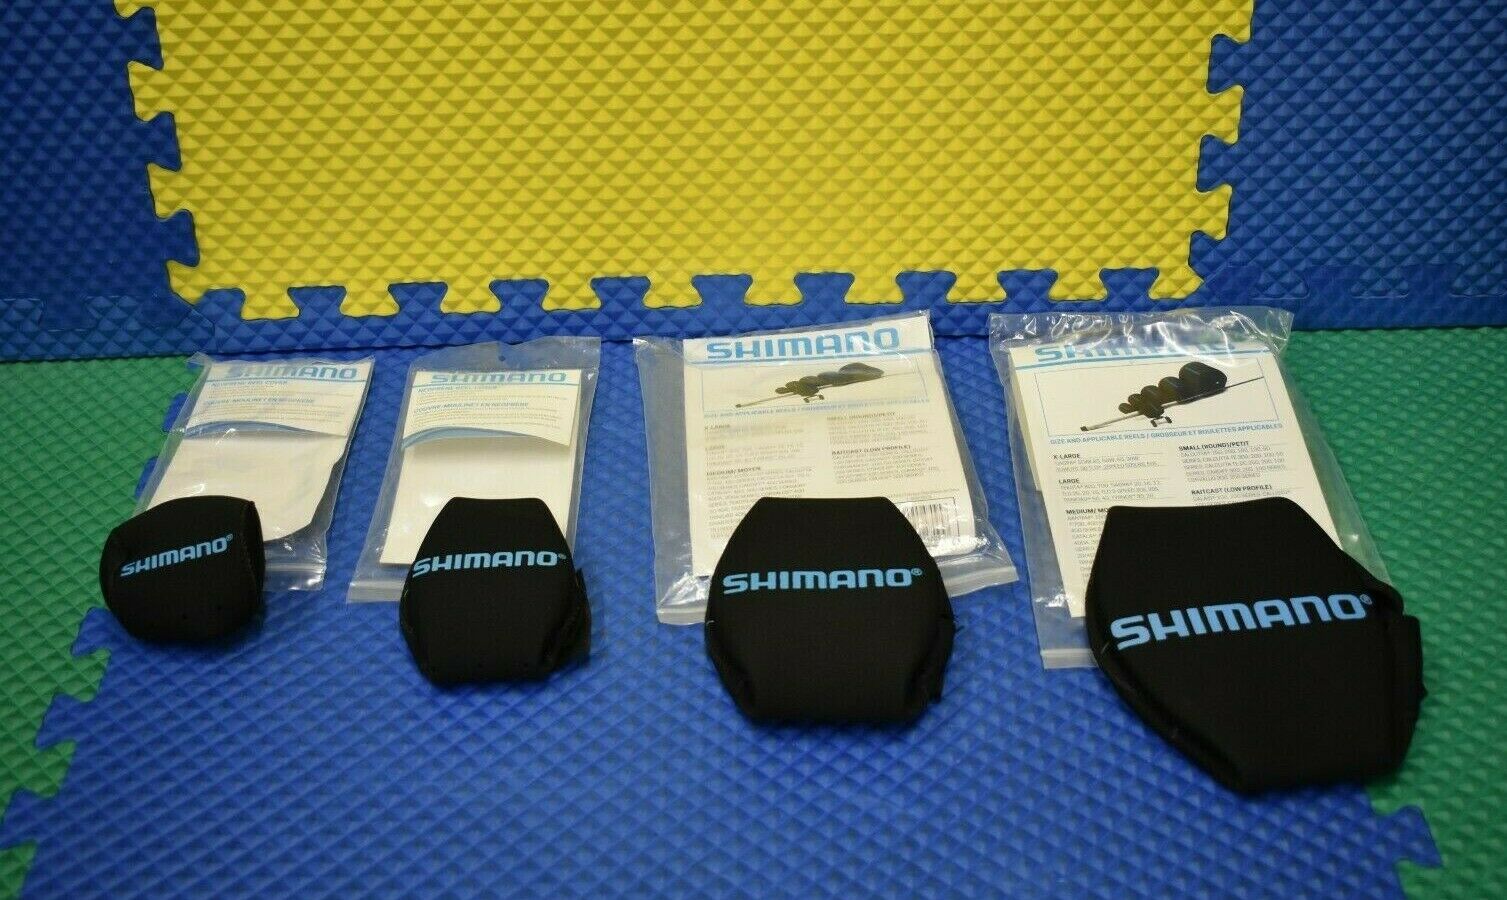 Shimano Neoprene Round Reel Covers Anrc Sm, Med, Lg, Xl  Choose Your Size!